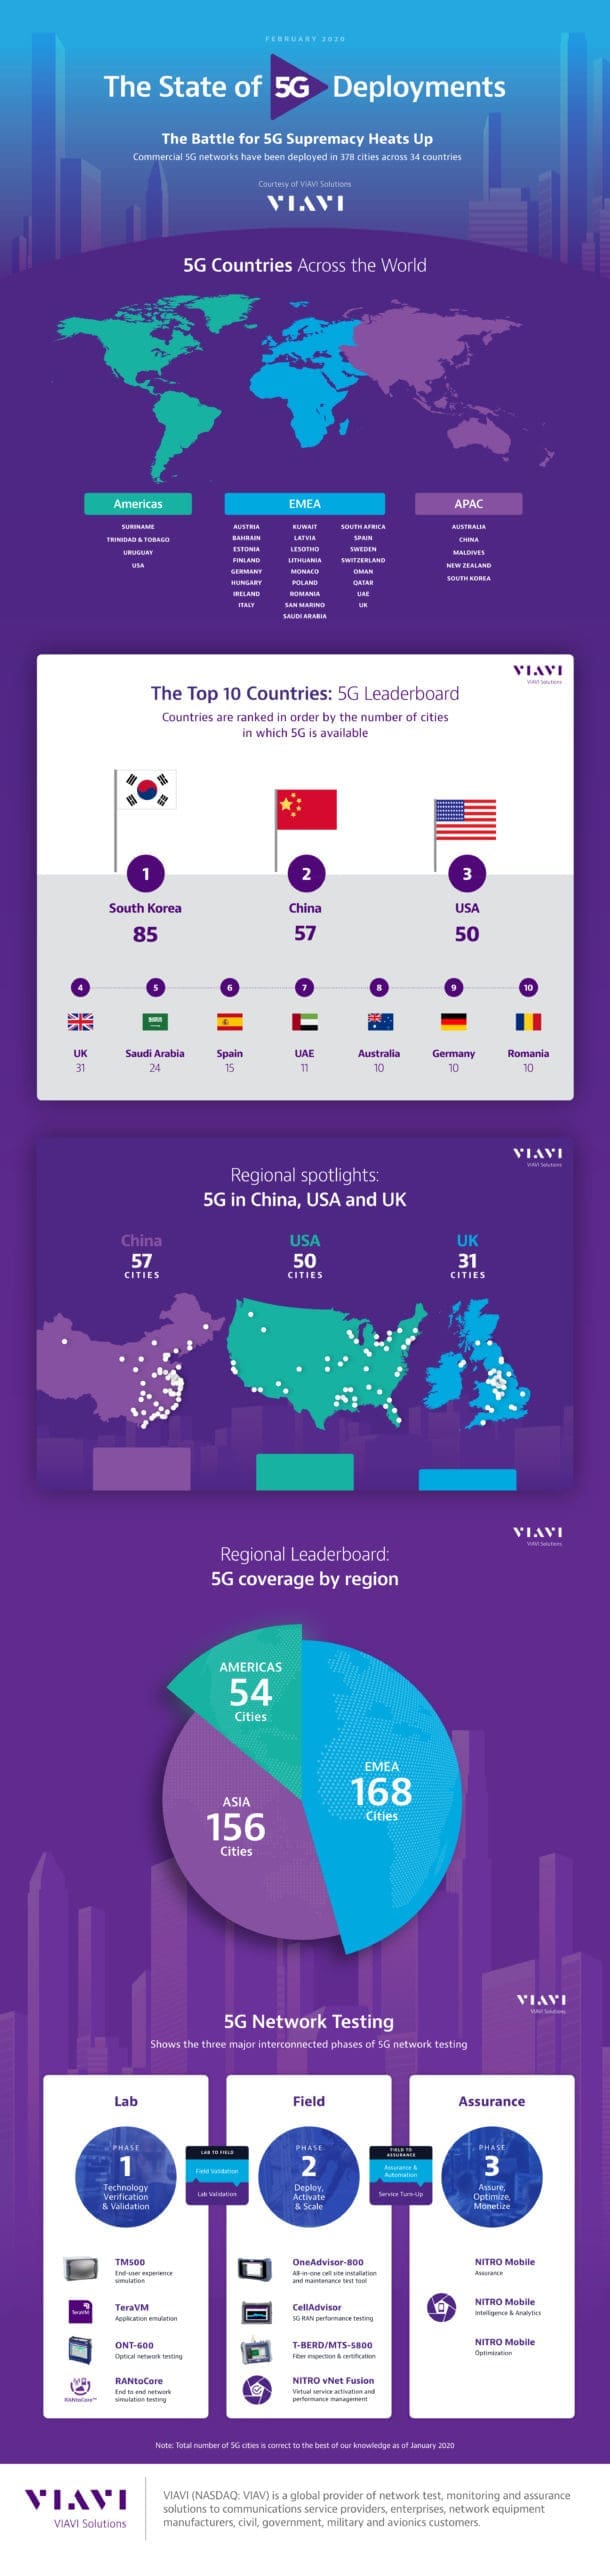 VIAVI State of 5G Infographic 2020 Final scaled